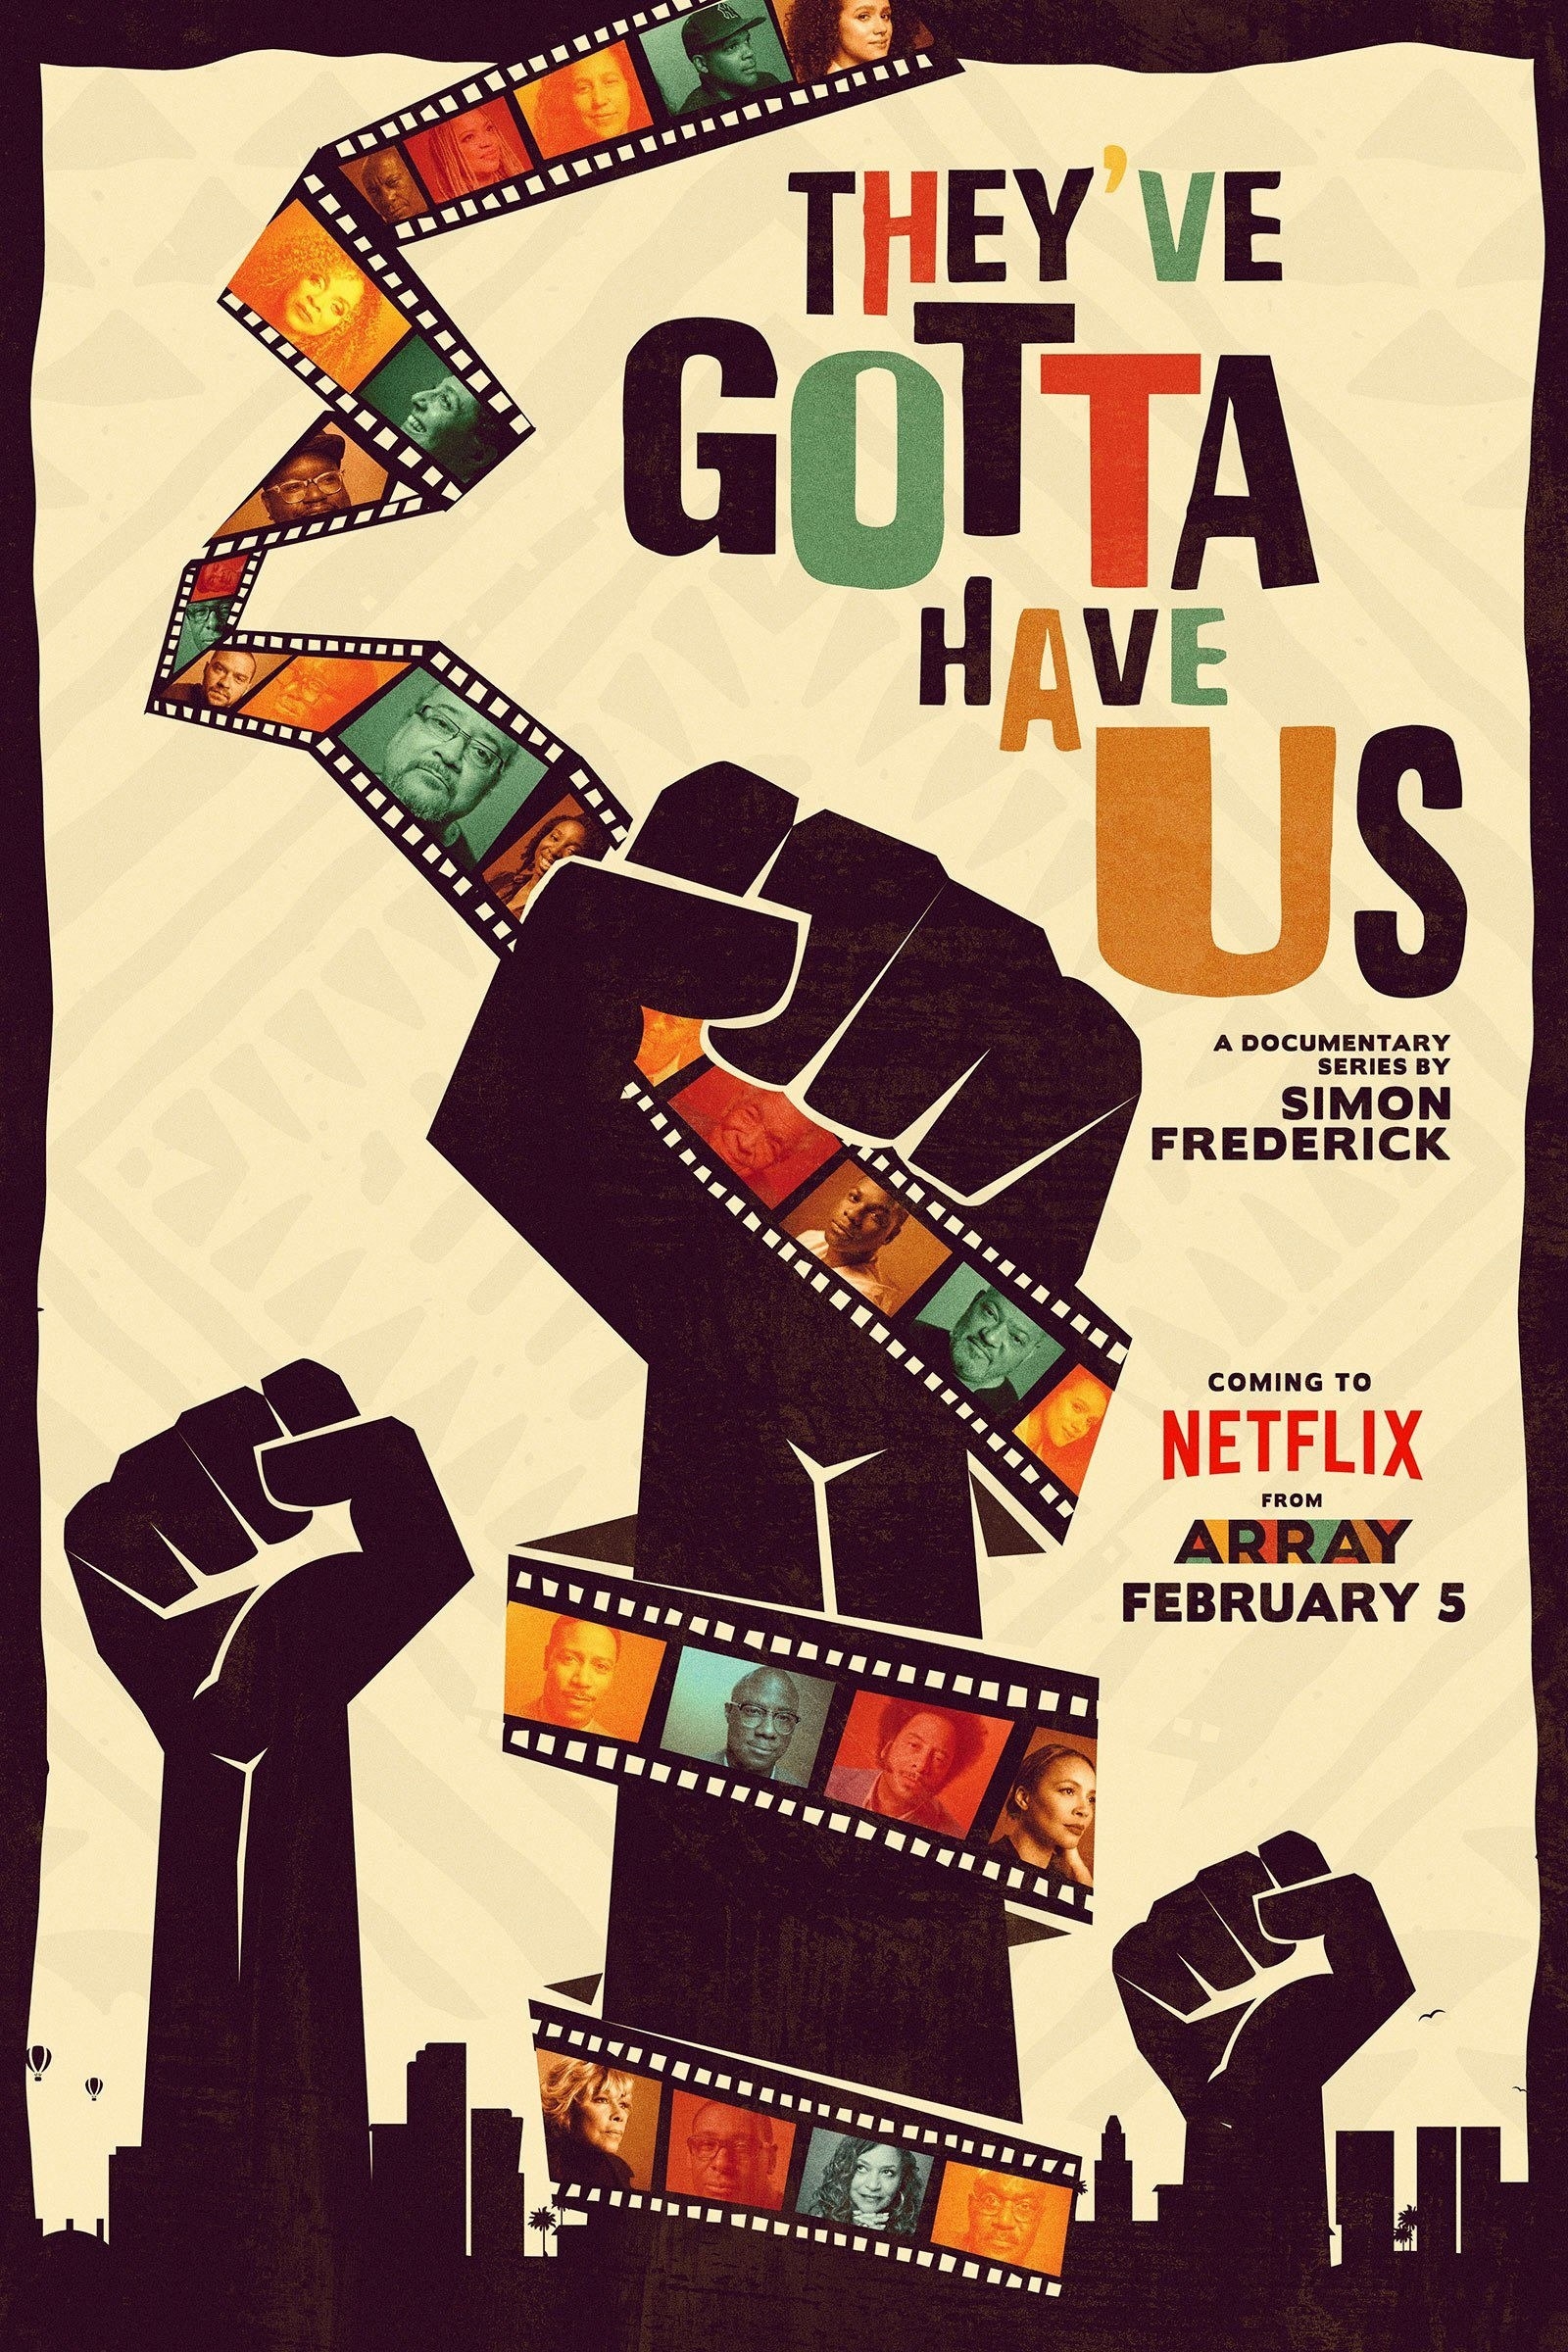 Image poster of the movie Black Hollywood: They&#x27;ve Gotta Have Us